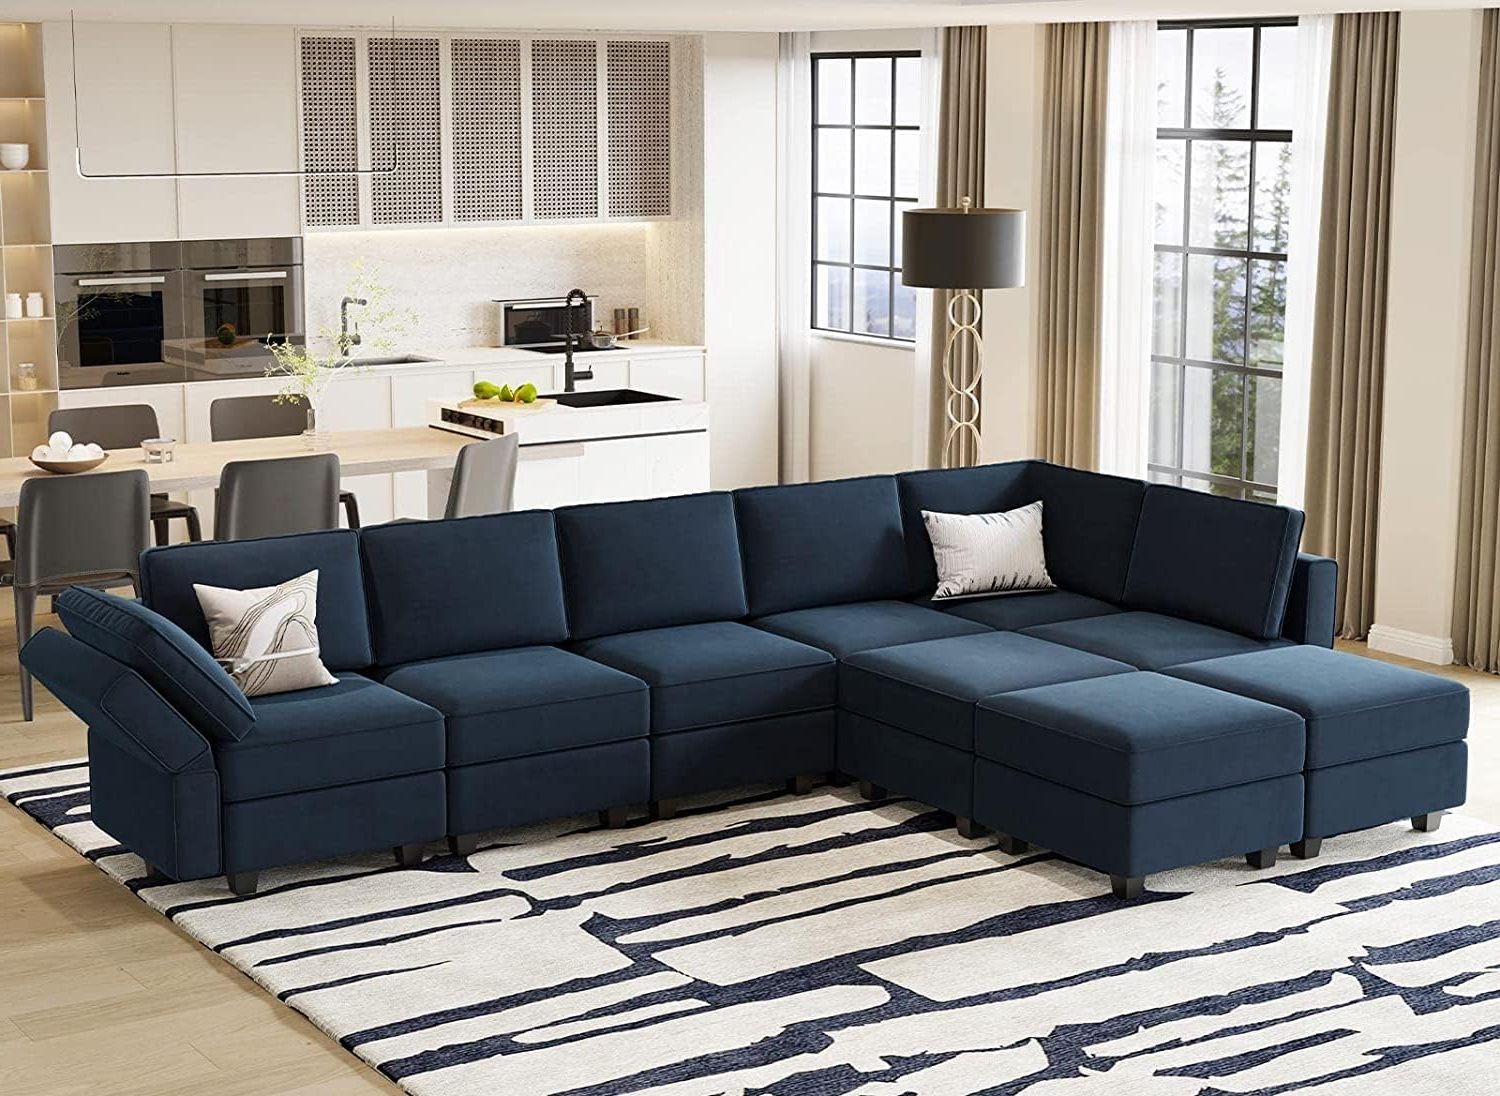 Most Recently Released L Shape Couches With Reversible Chaises Throughout Amazon: Modular Sectional Sofa Couch With Reversible Double Chaises (Photo 10 of 15)